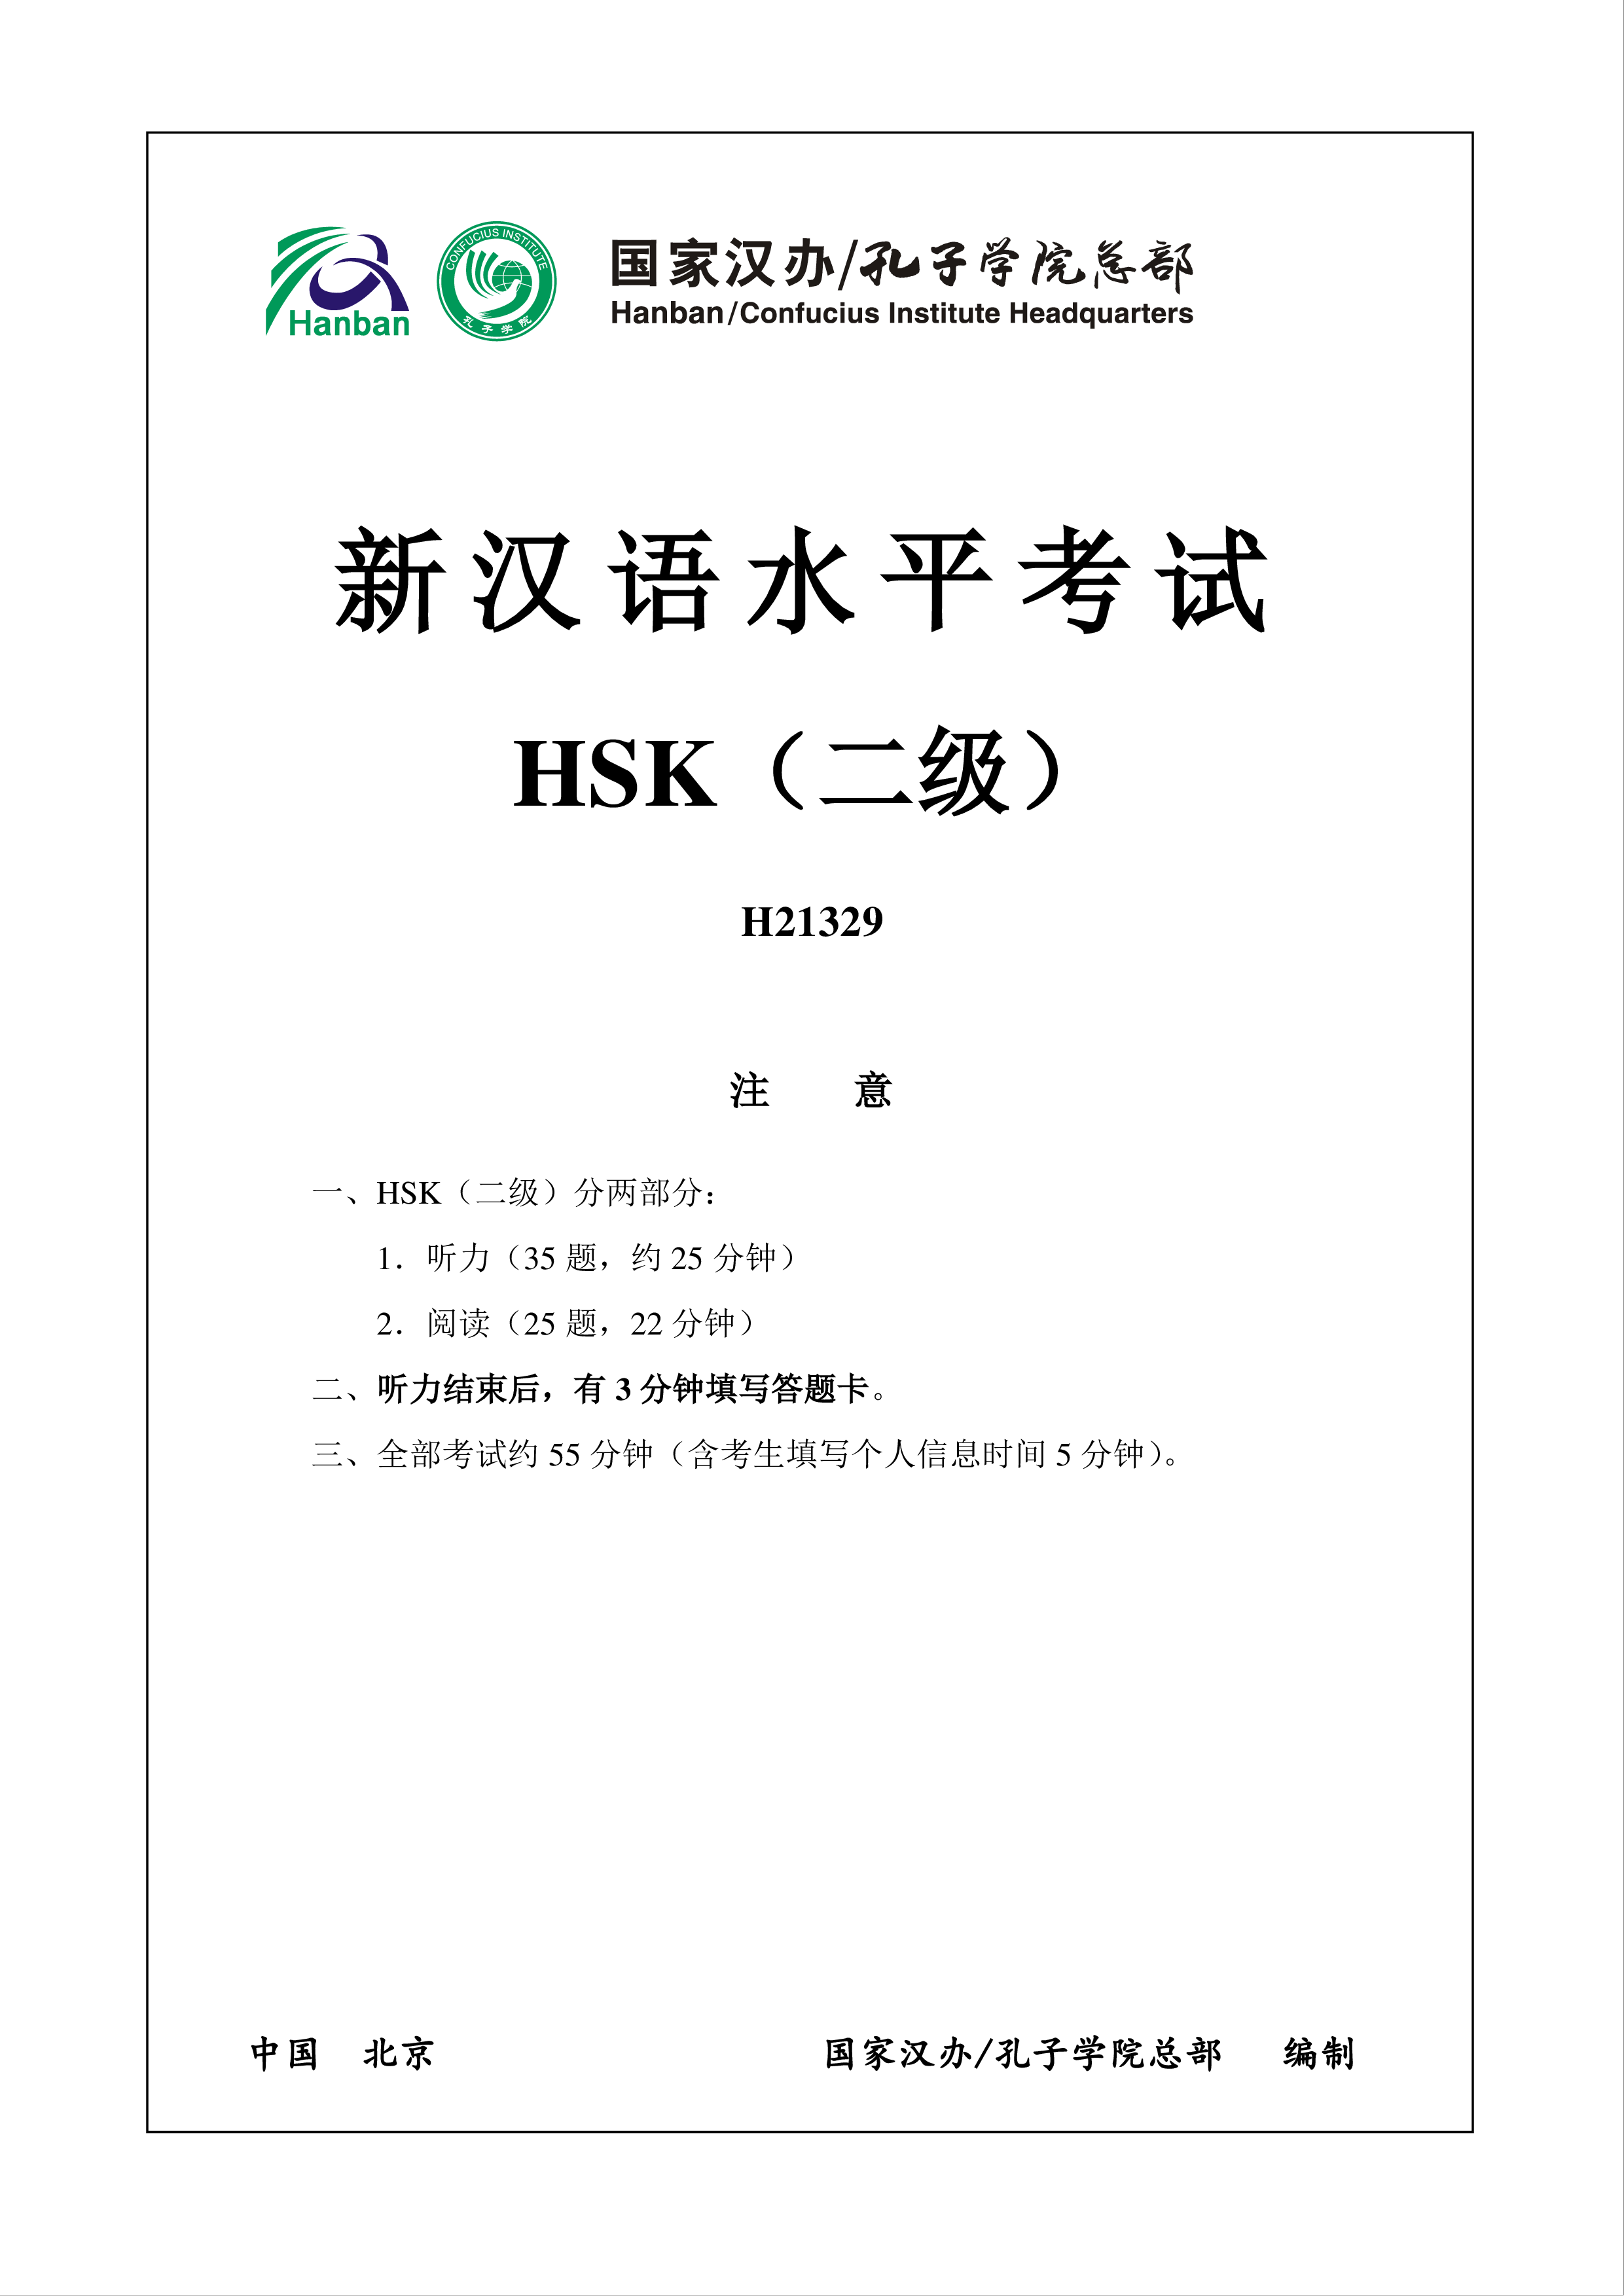 hsk2 chinese exam incl audio and answers # h21329 template